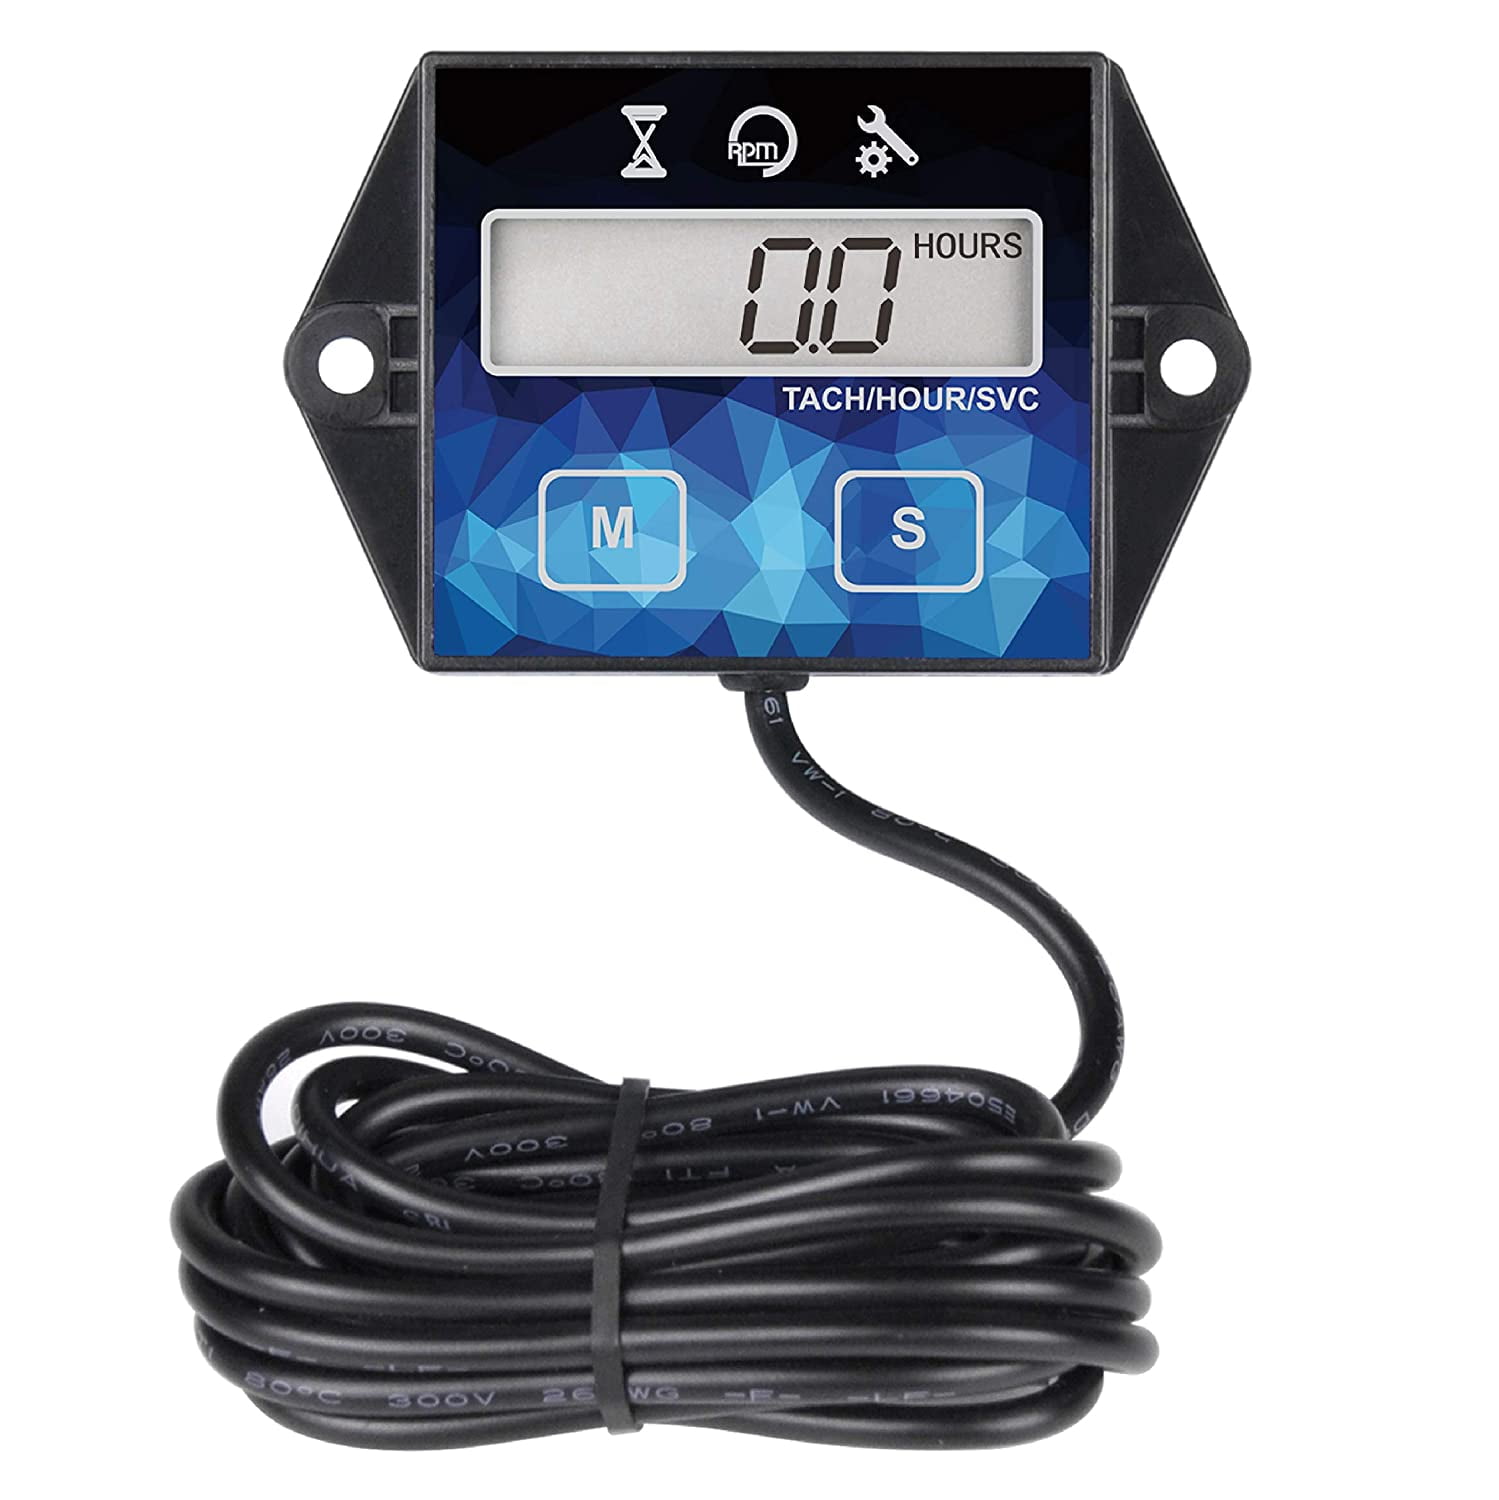 Digital Engine Tach Tachometer Hour Meter Inductive for Motorcycle Motor SM YL 